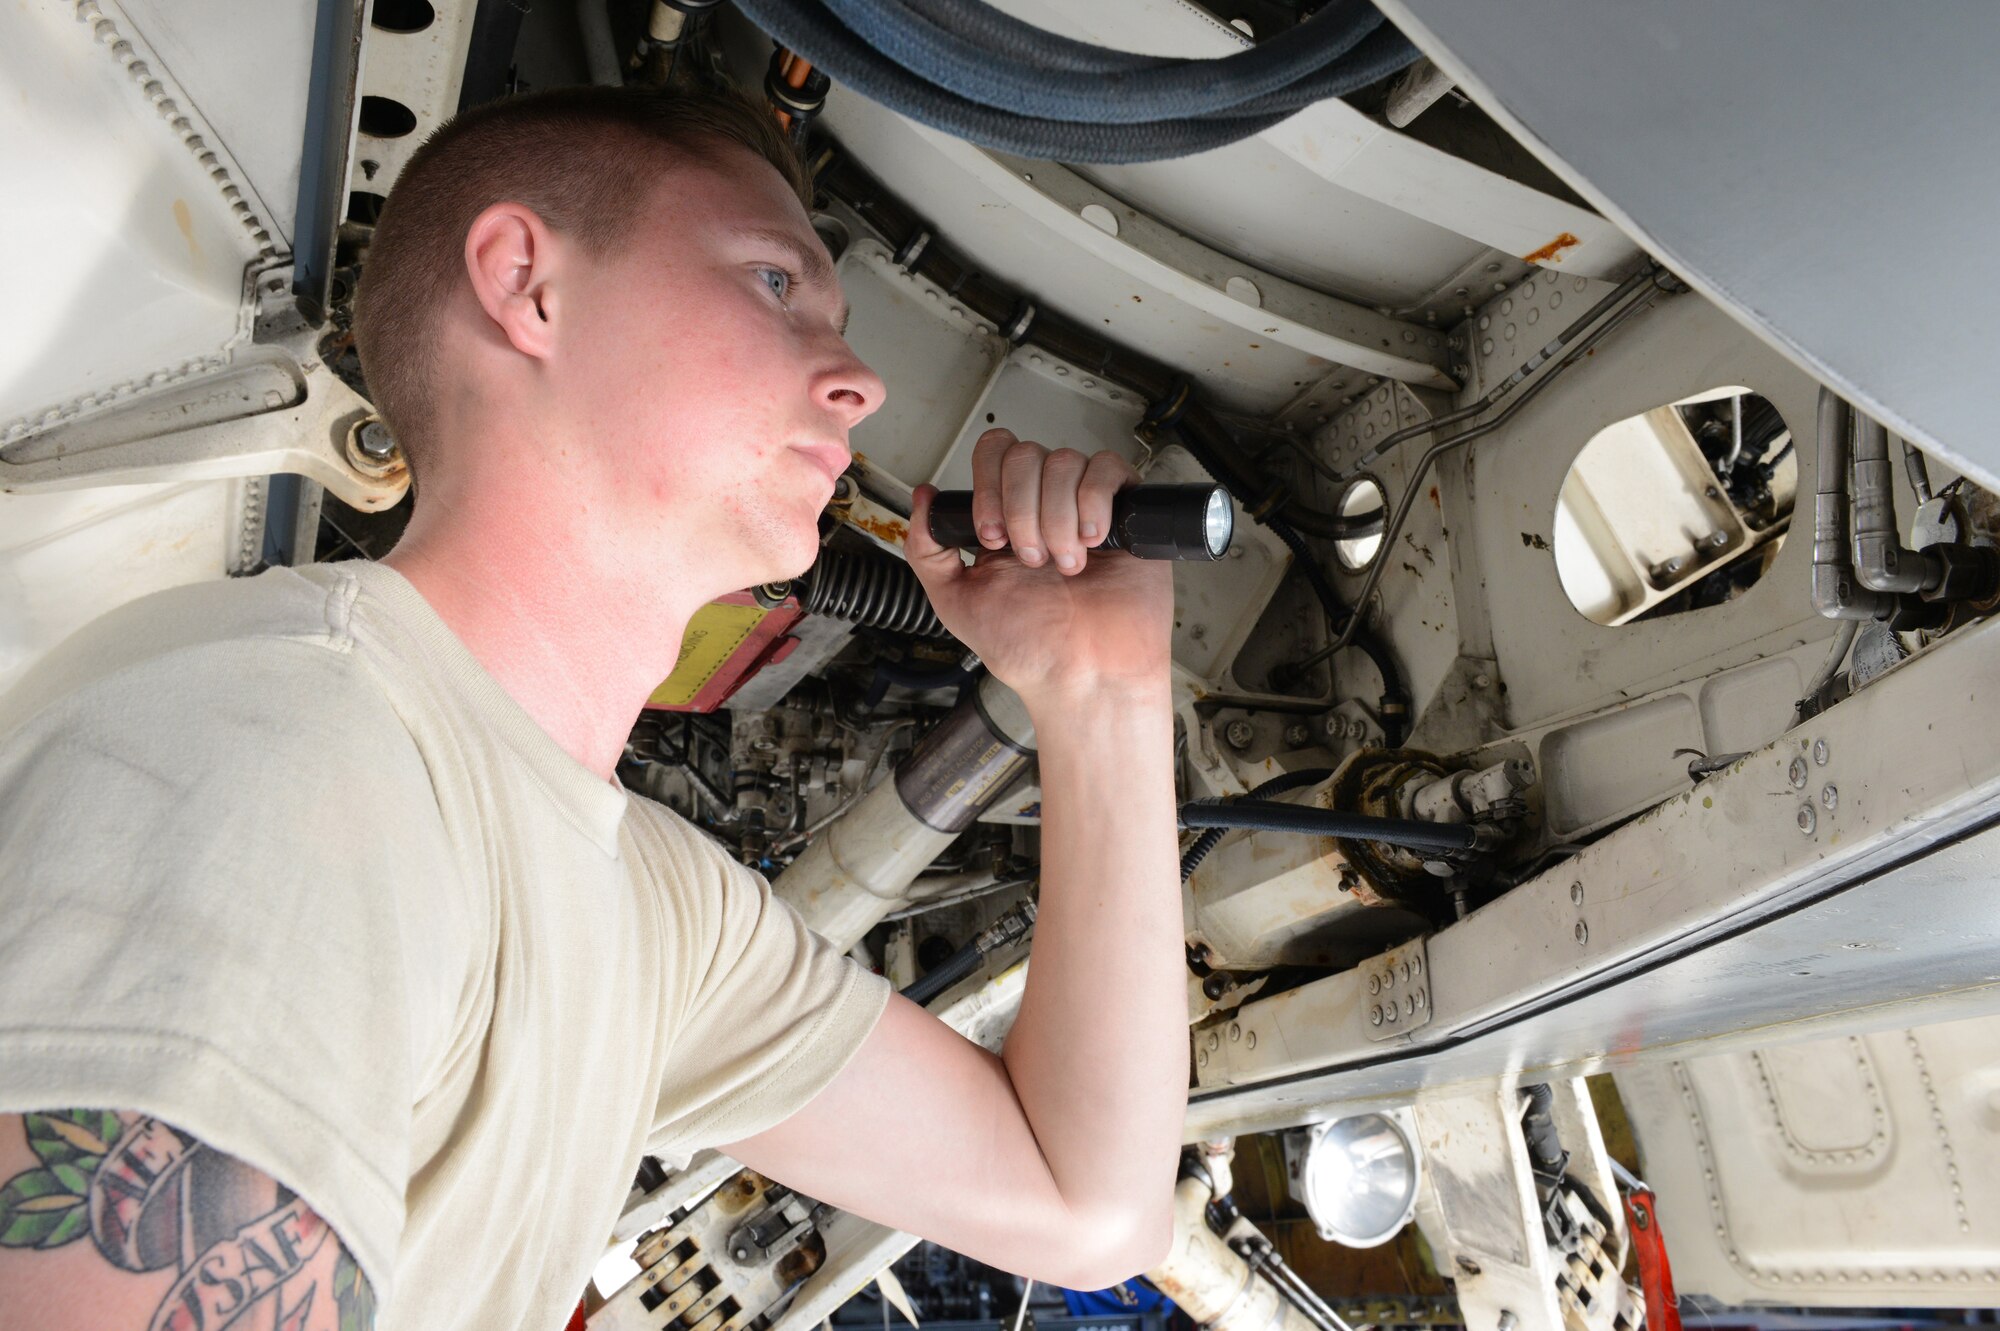 Airman 1st Class Michael Miller, 944th Fighter Wing (awaiting info), inspects hydraulic landing gear components during a phase inspection on an F-16 at Luke Air Force Base, Arizona, Oct. 9, 2015. A phase inspection occurs every 300 hours on an F-16 to get more in depth and search for any discrepancies. This continues the aircraft’s longevity. (U.S. Air Force photo by Senior Airman James Hensley)  